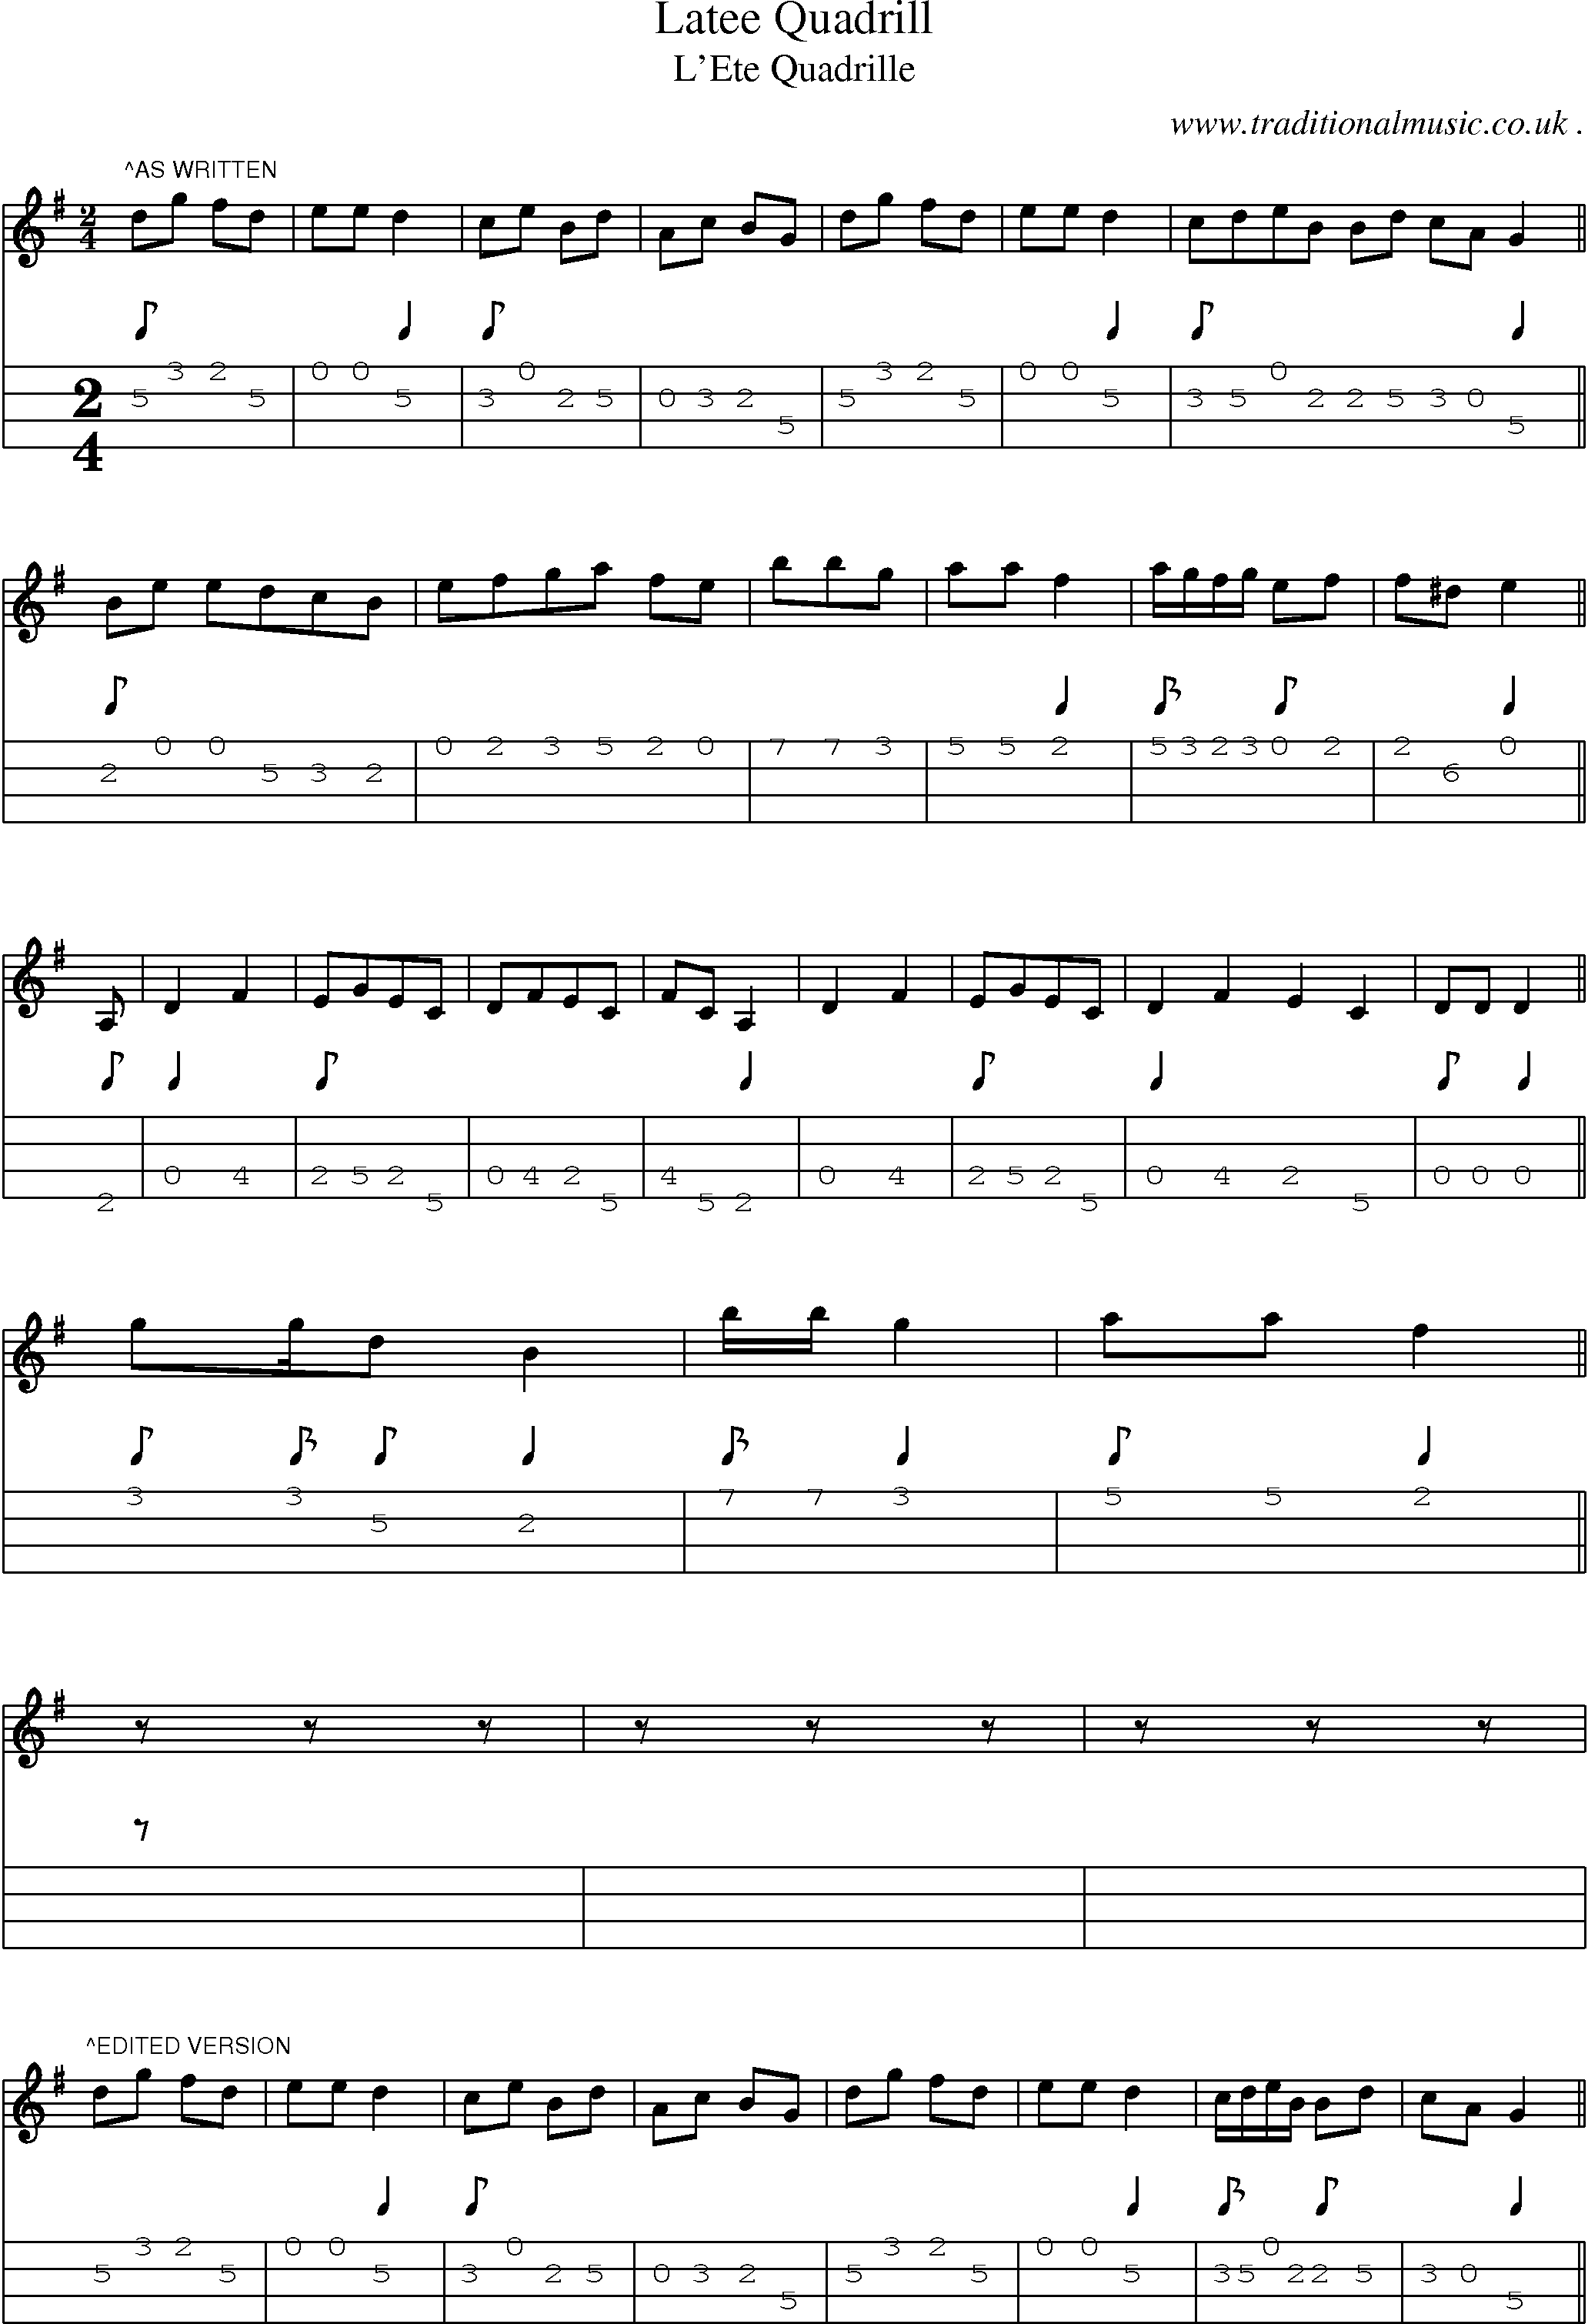 Sheet-Music and Mandolin Tabs for Latee Quadrill